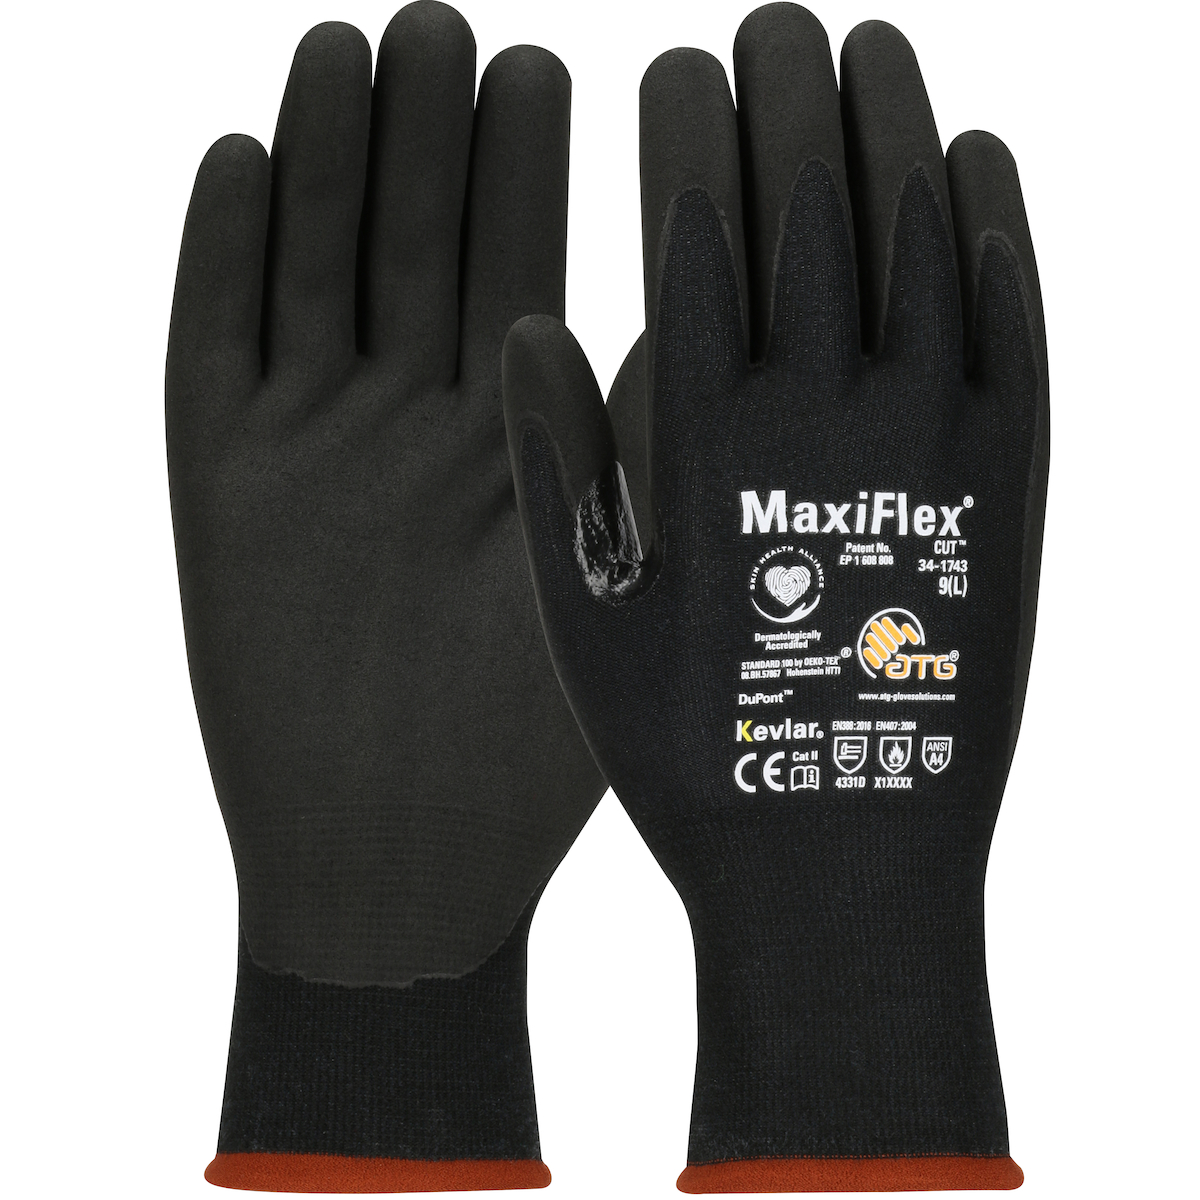 #34-1743 PIP® MaxiFlext® Cut Seamless Knit Kevlar Gloves with Black Nitrile MicroFoam Palm Coating are Level A4